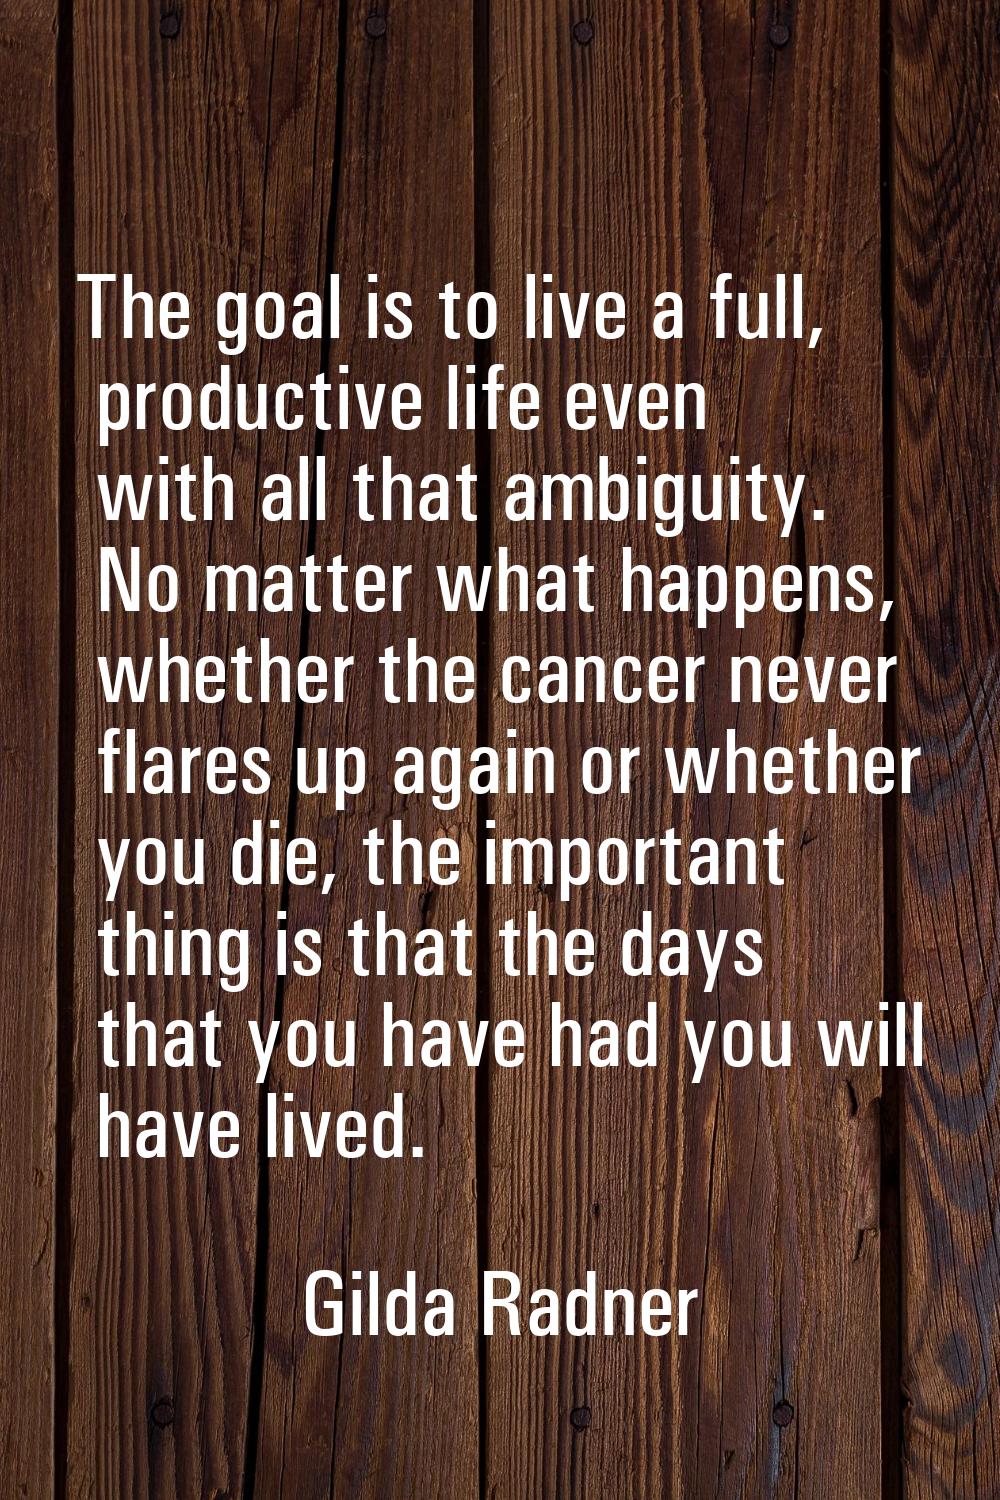 The goal is to live a full, productive life even with all that ambiguity. No matter what happens, w